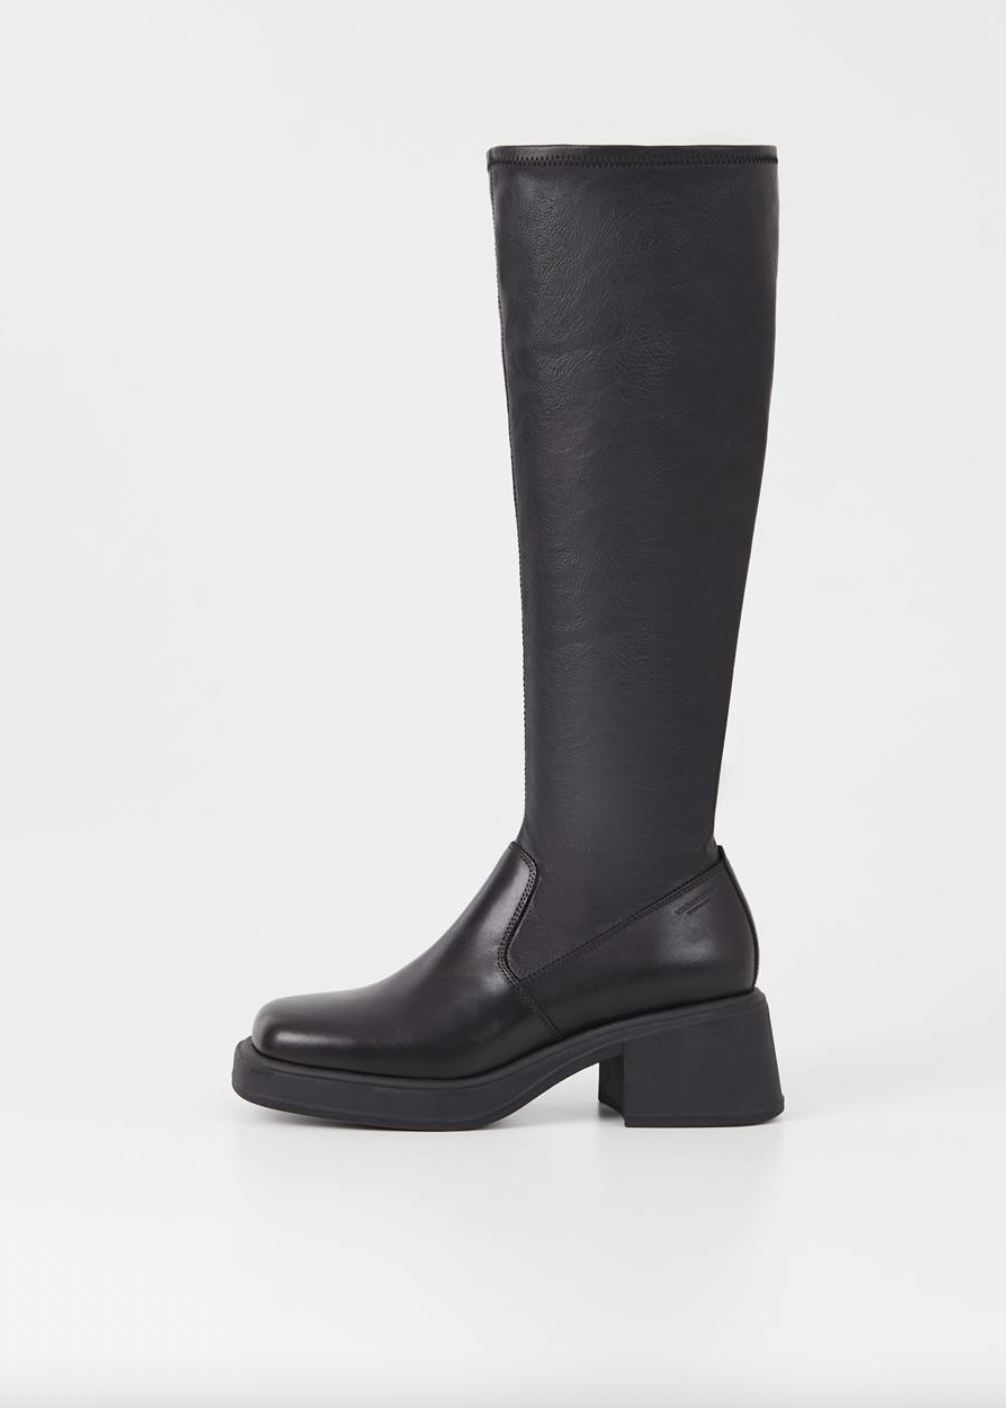 Product Image for Dorah Tall Boot, Black